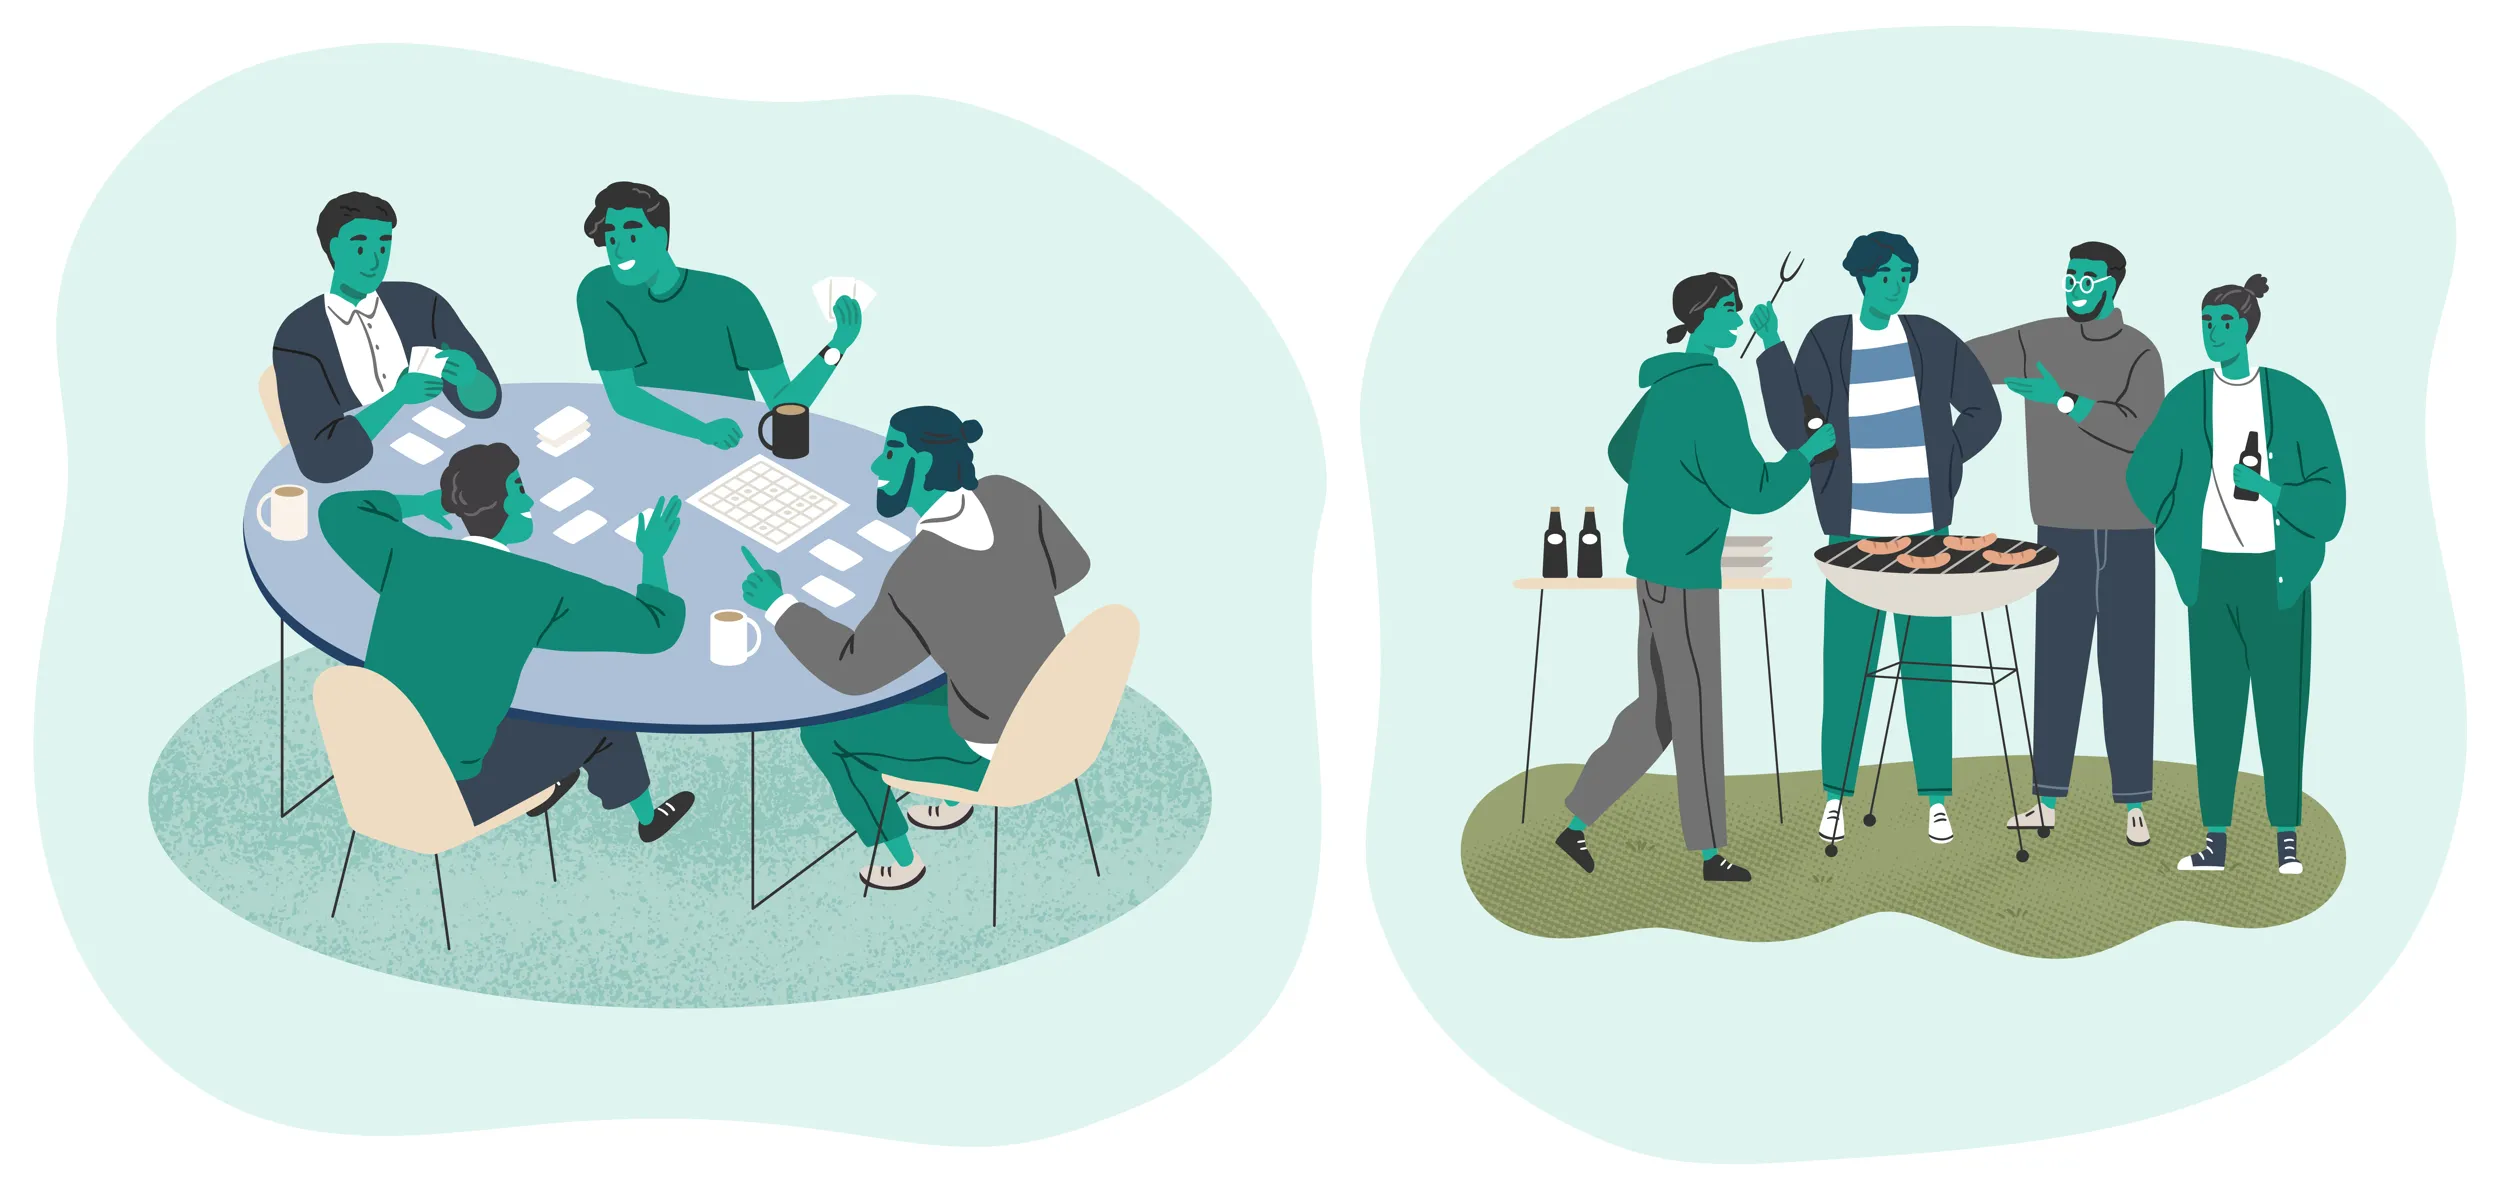 Left: a cartoon of 4 friends playing a game at a table. Right: Cartoon of 4 different friends at a BBQ.